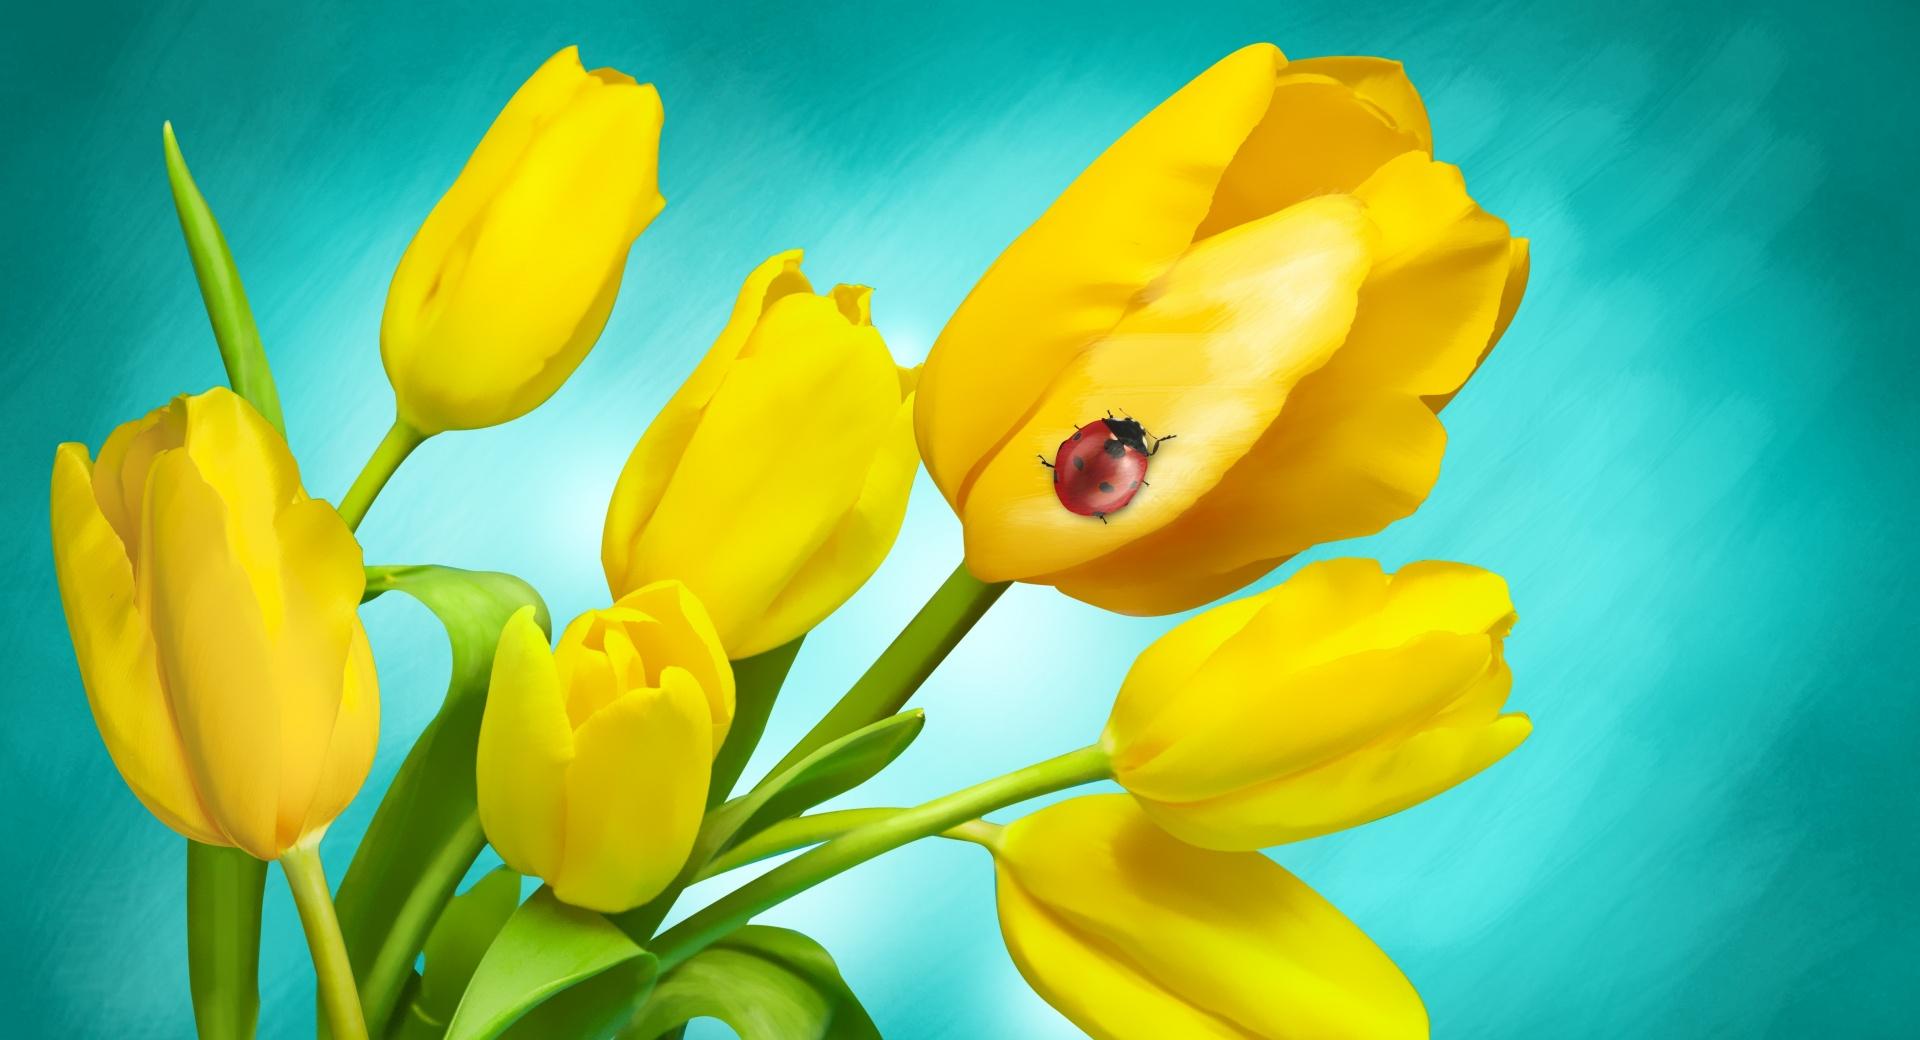 Ladybird and Yellow Tulips in Vase wallpapers HD quality